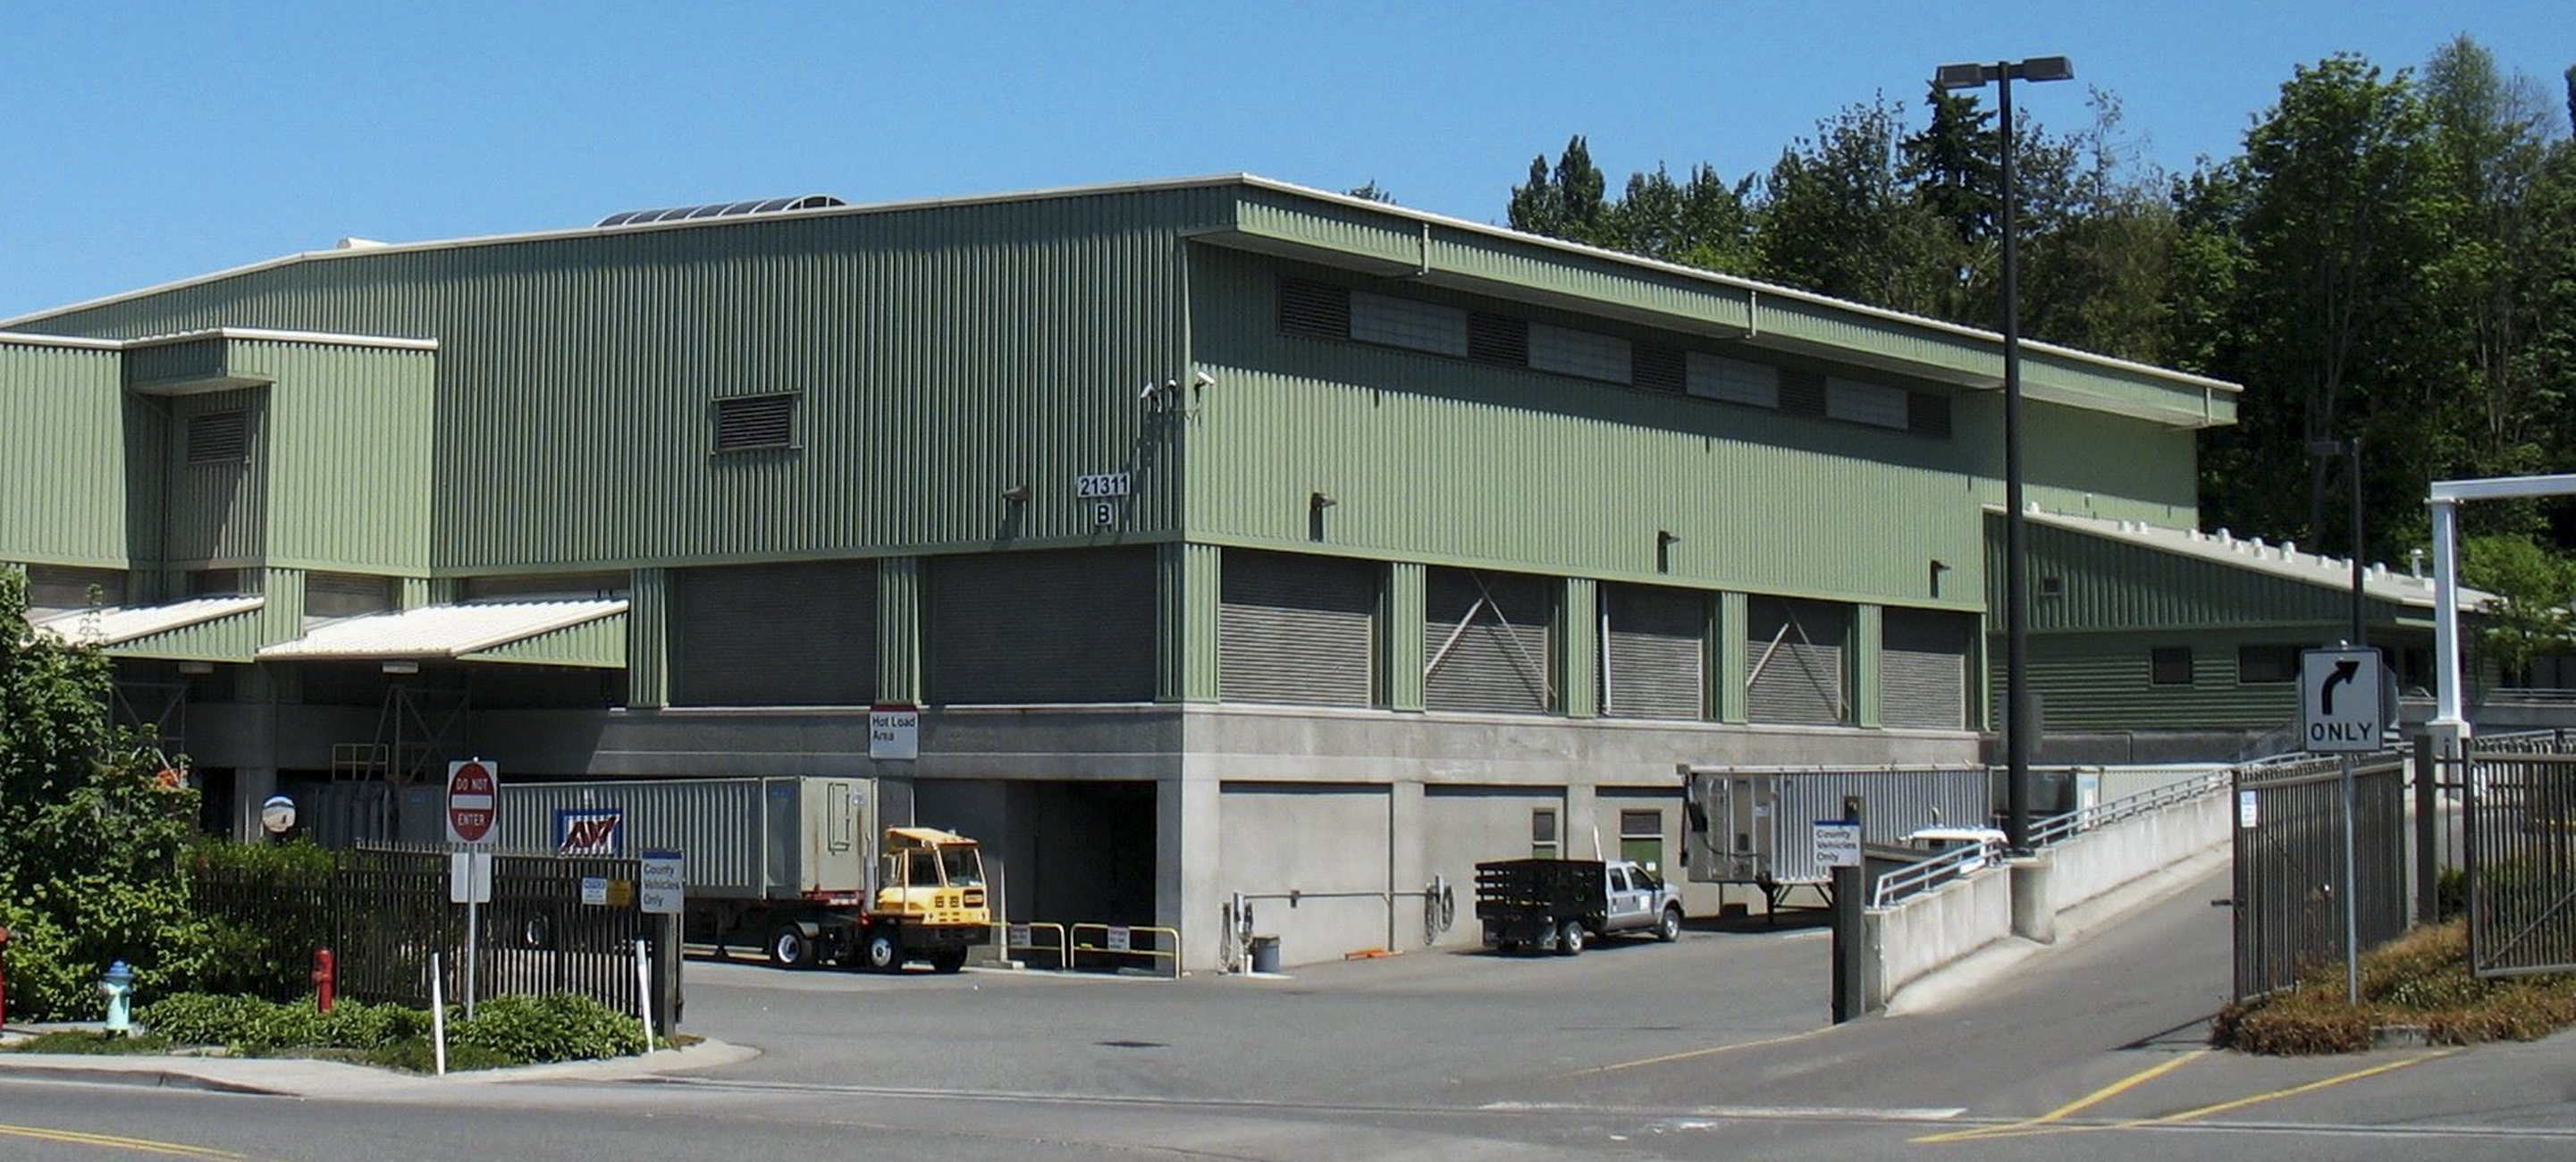 Snohomish County Solid Waste On-Call Engineering Services